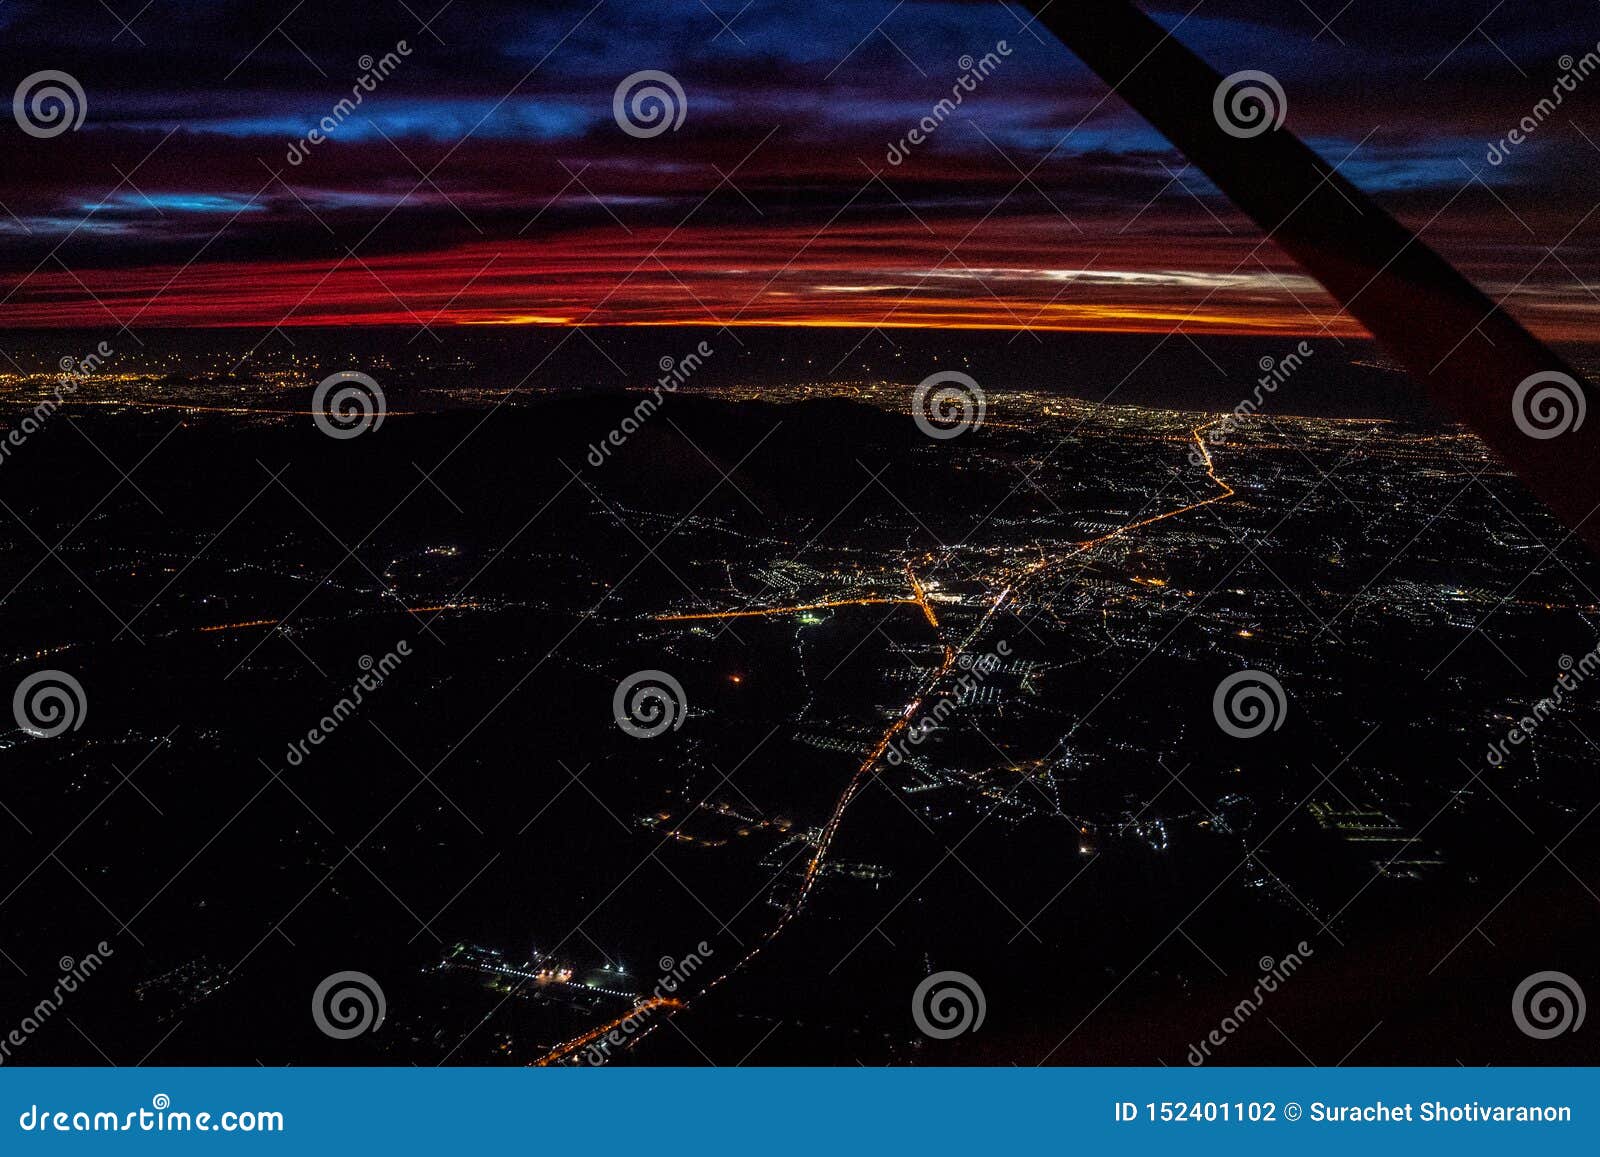 night view from the jetplane in twilight time with the red sky and light of the city